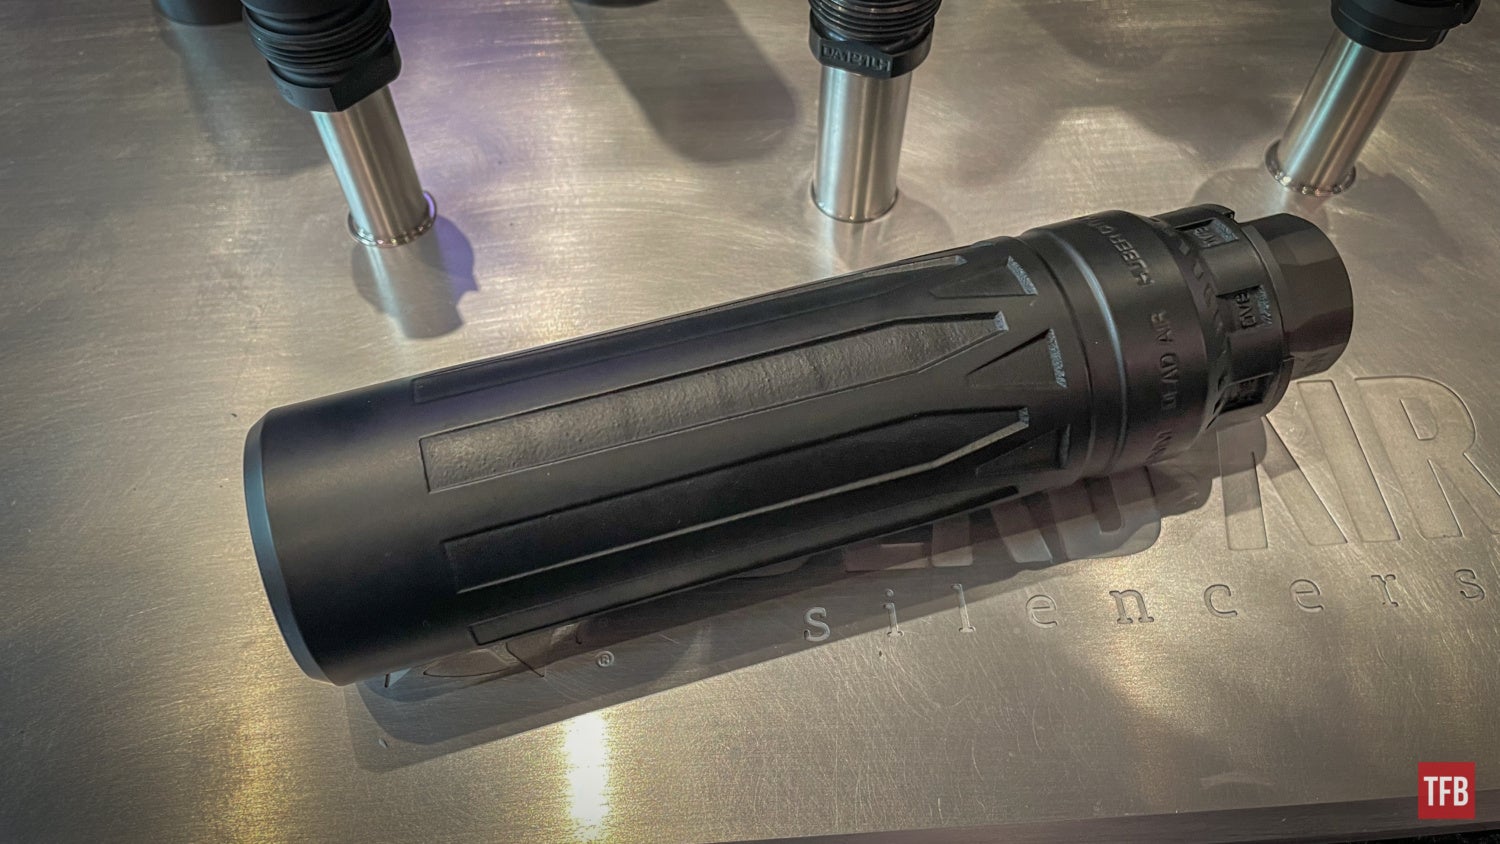 SILENCER SATURDAY 313: 2024 SHOT Show Silencers In Review